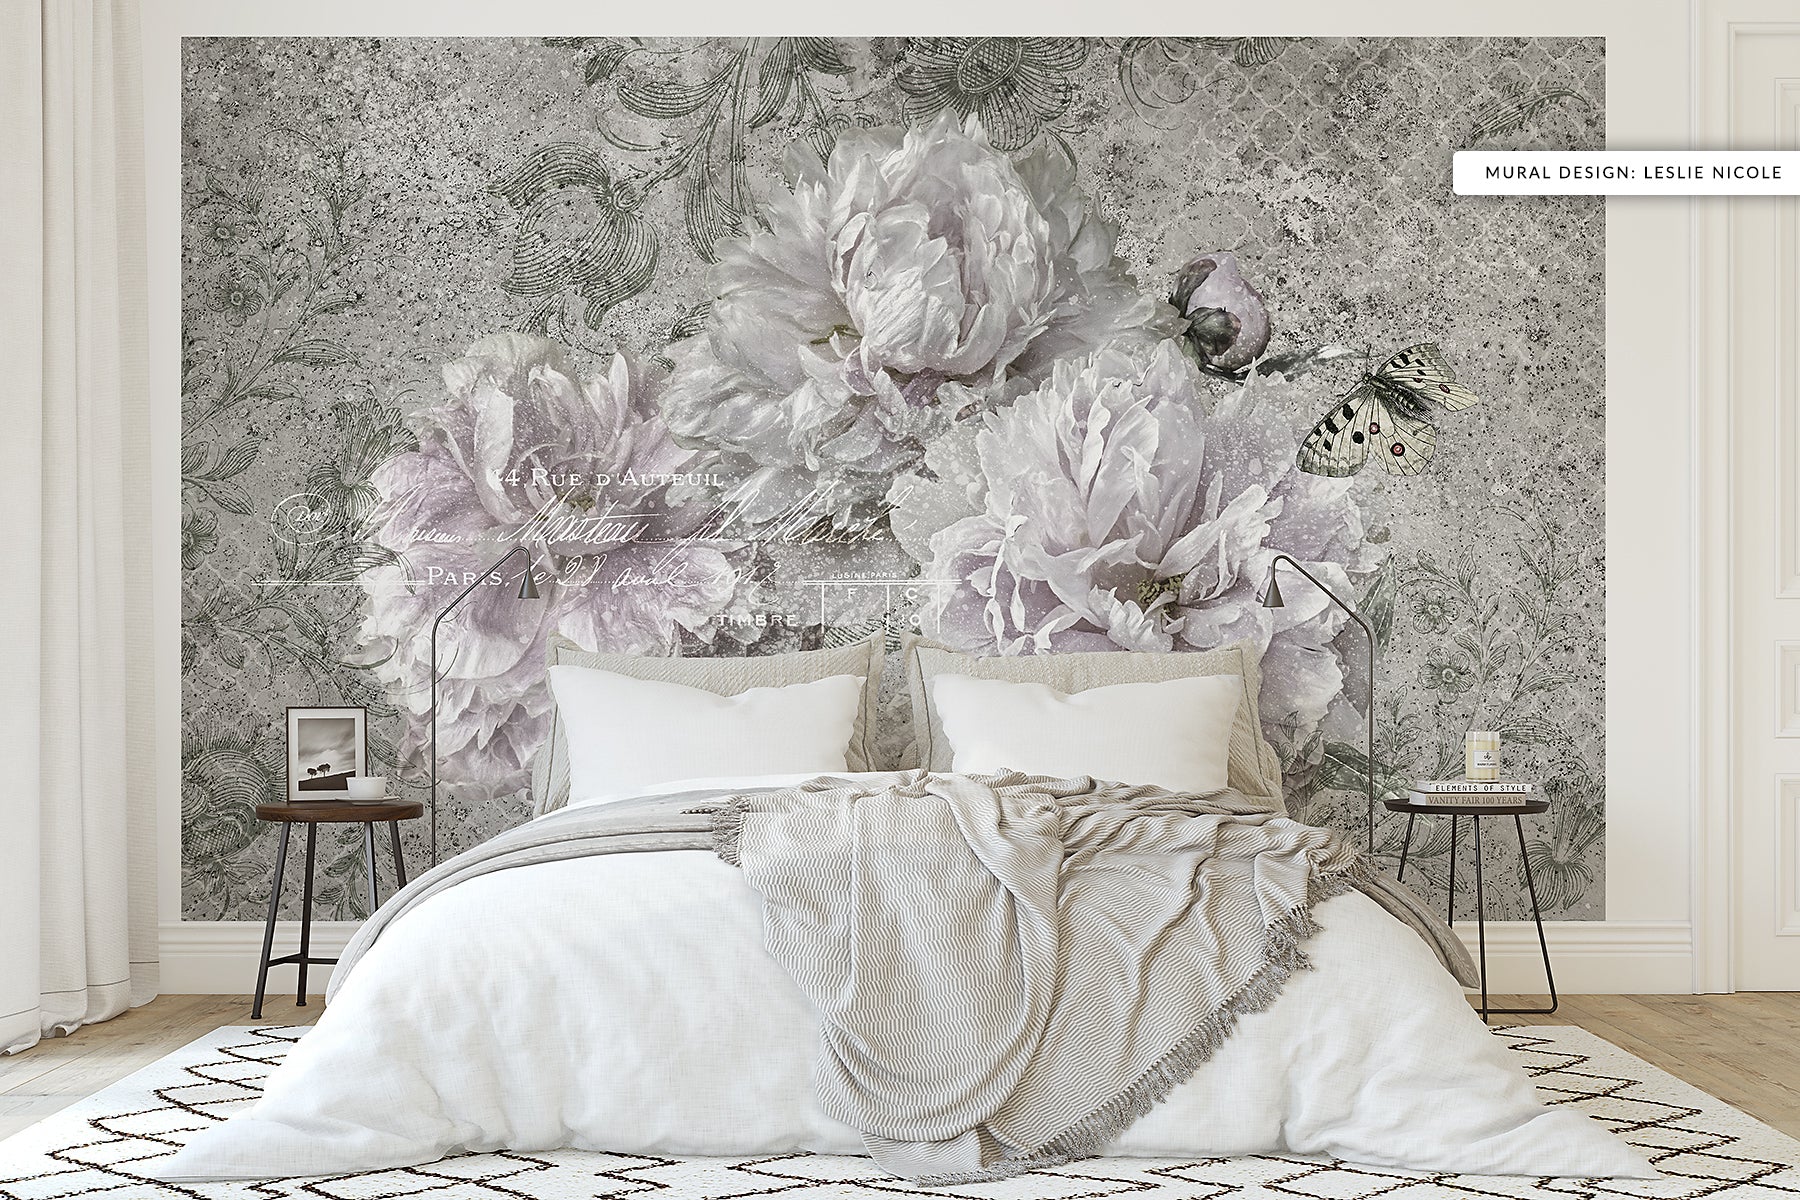 Ornamental Peony Grunge Mural design for a bedroom.